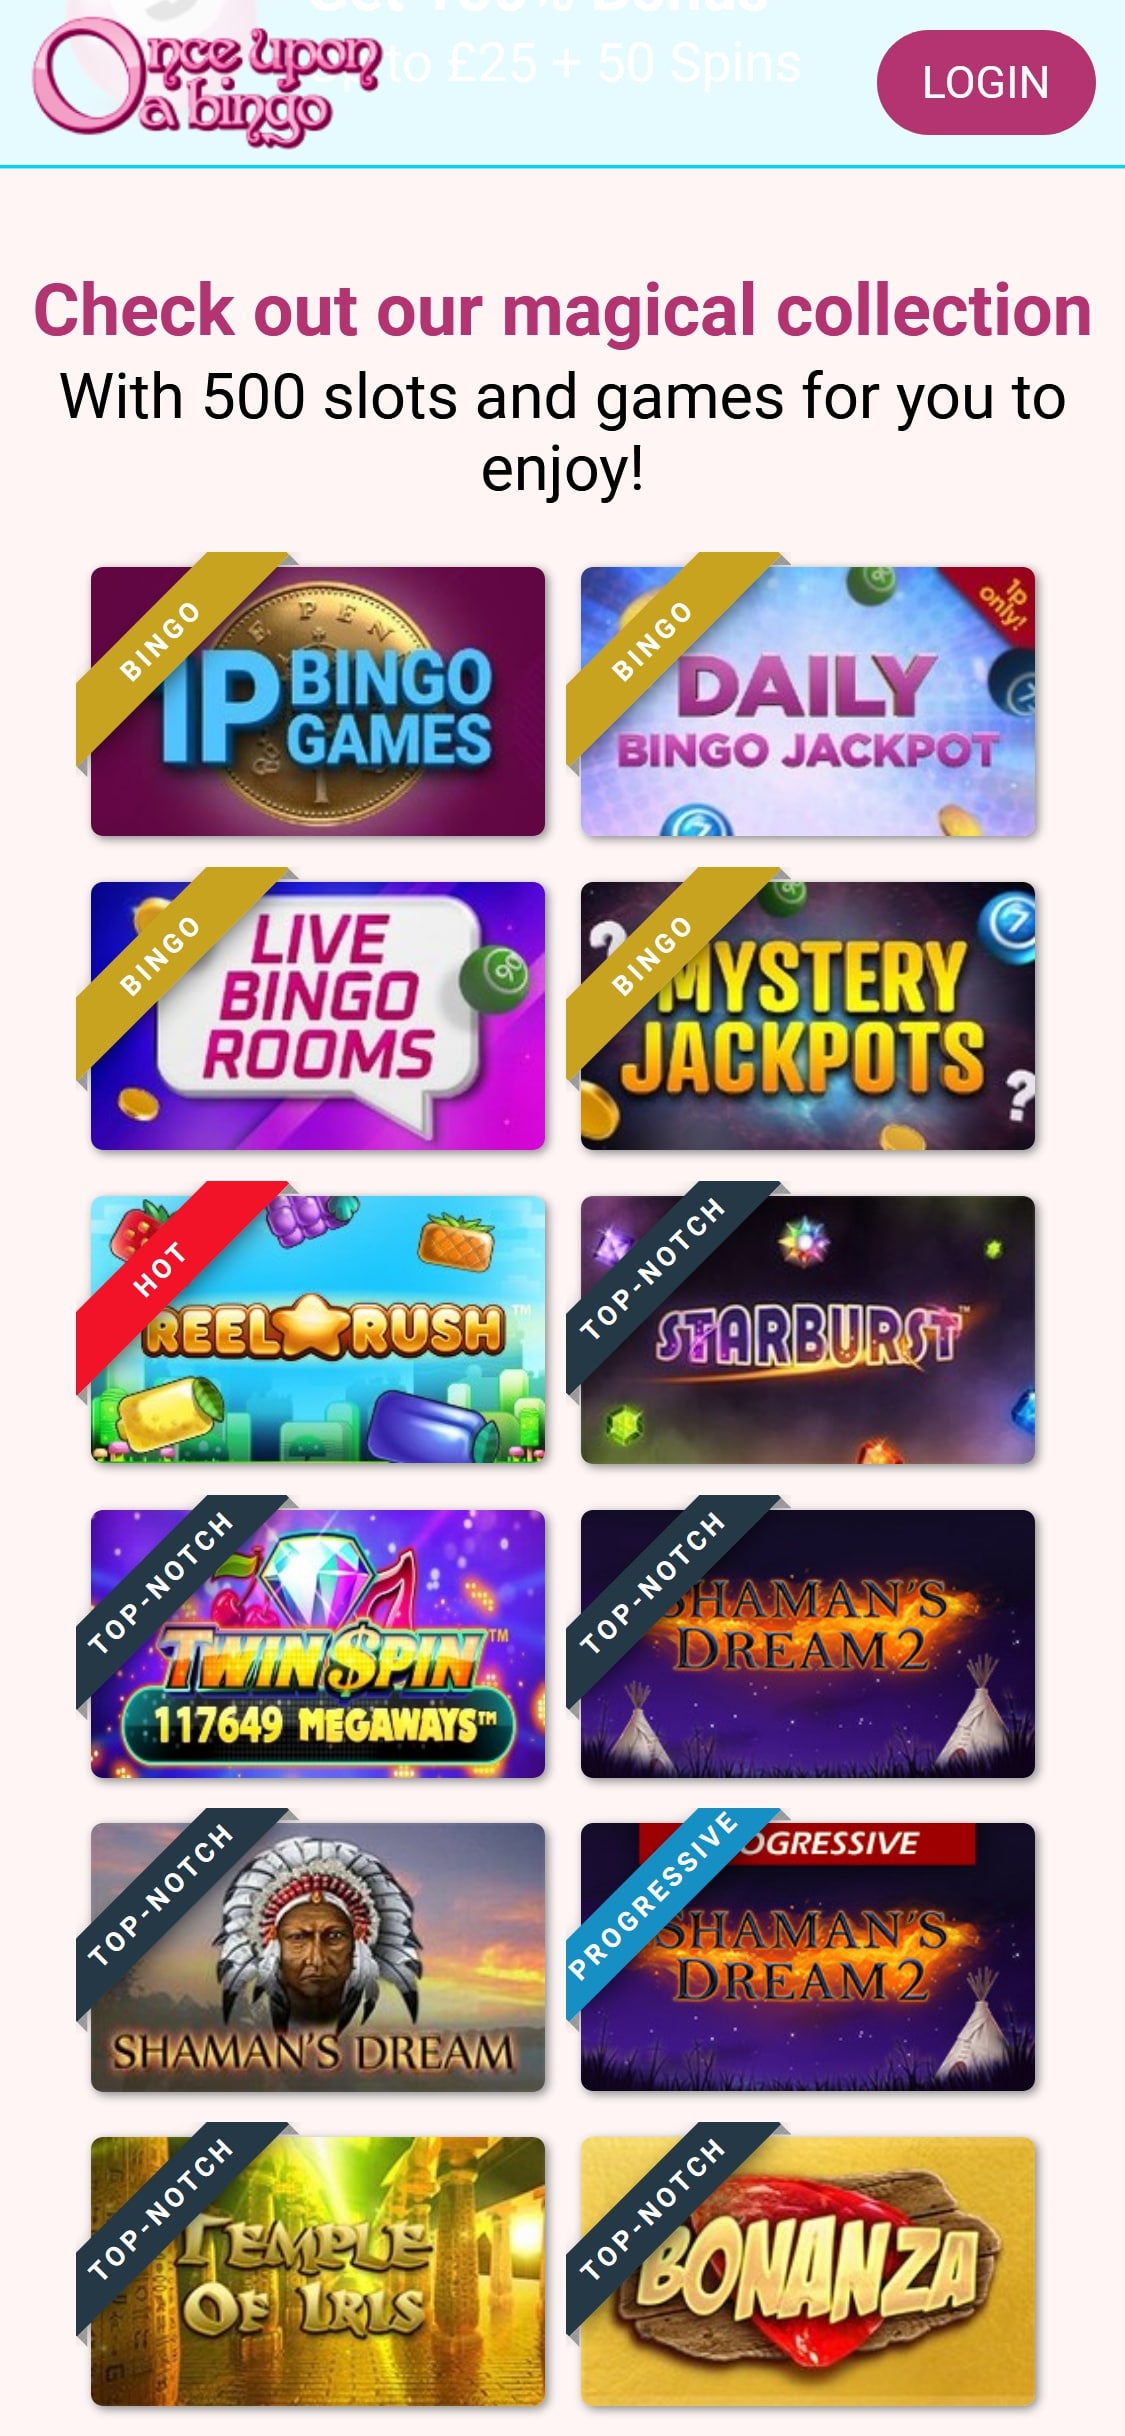 Once Upon a Bingo Casino Mobile Games Review